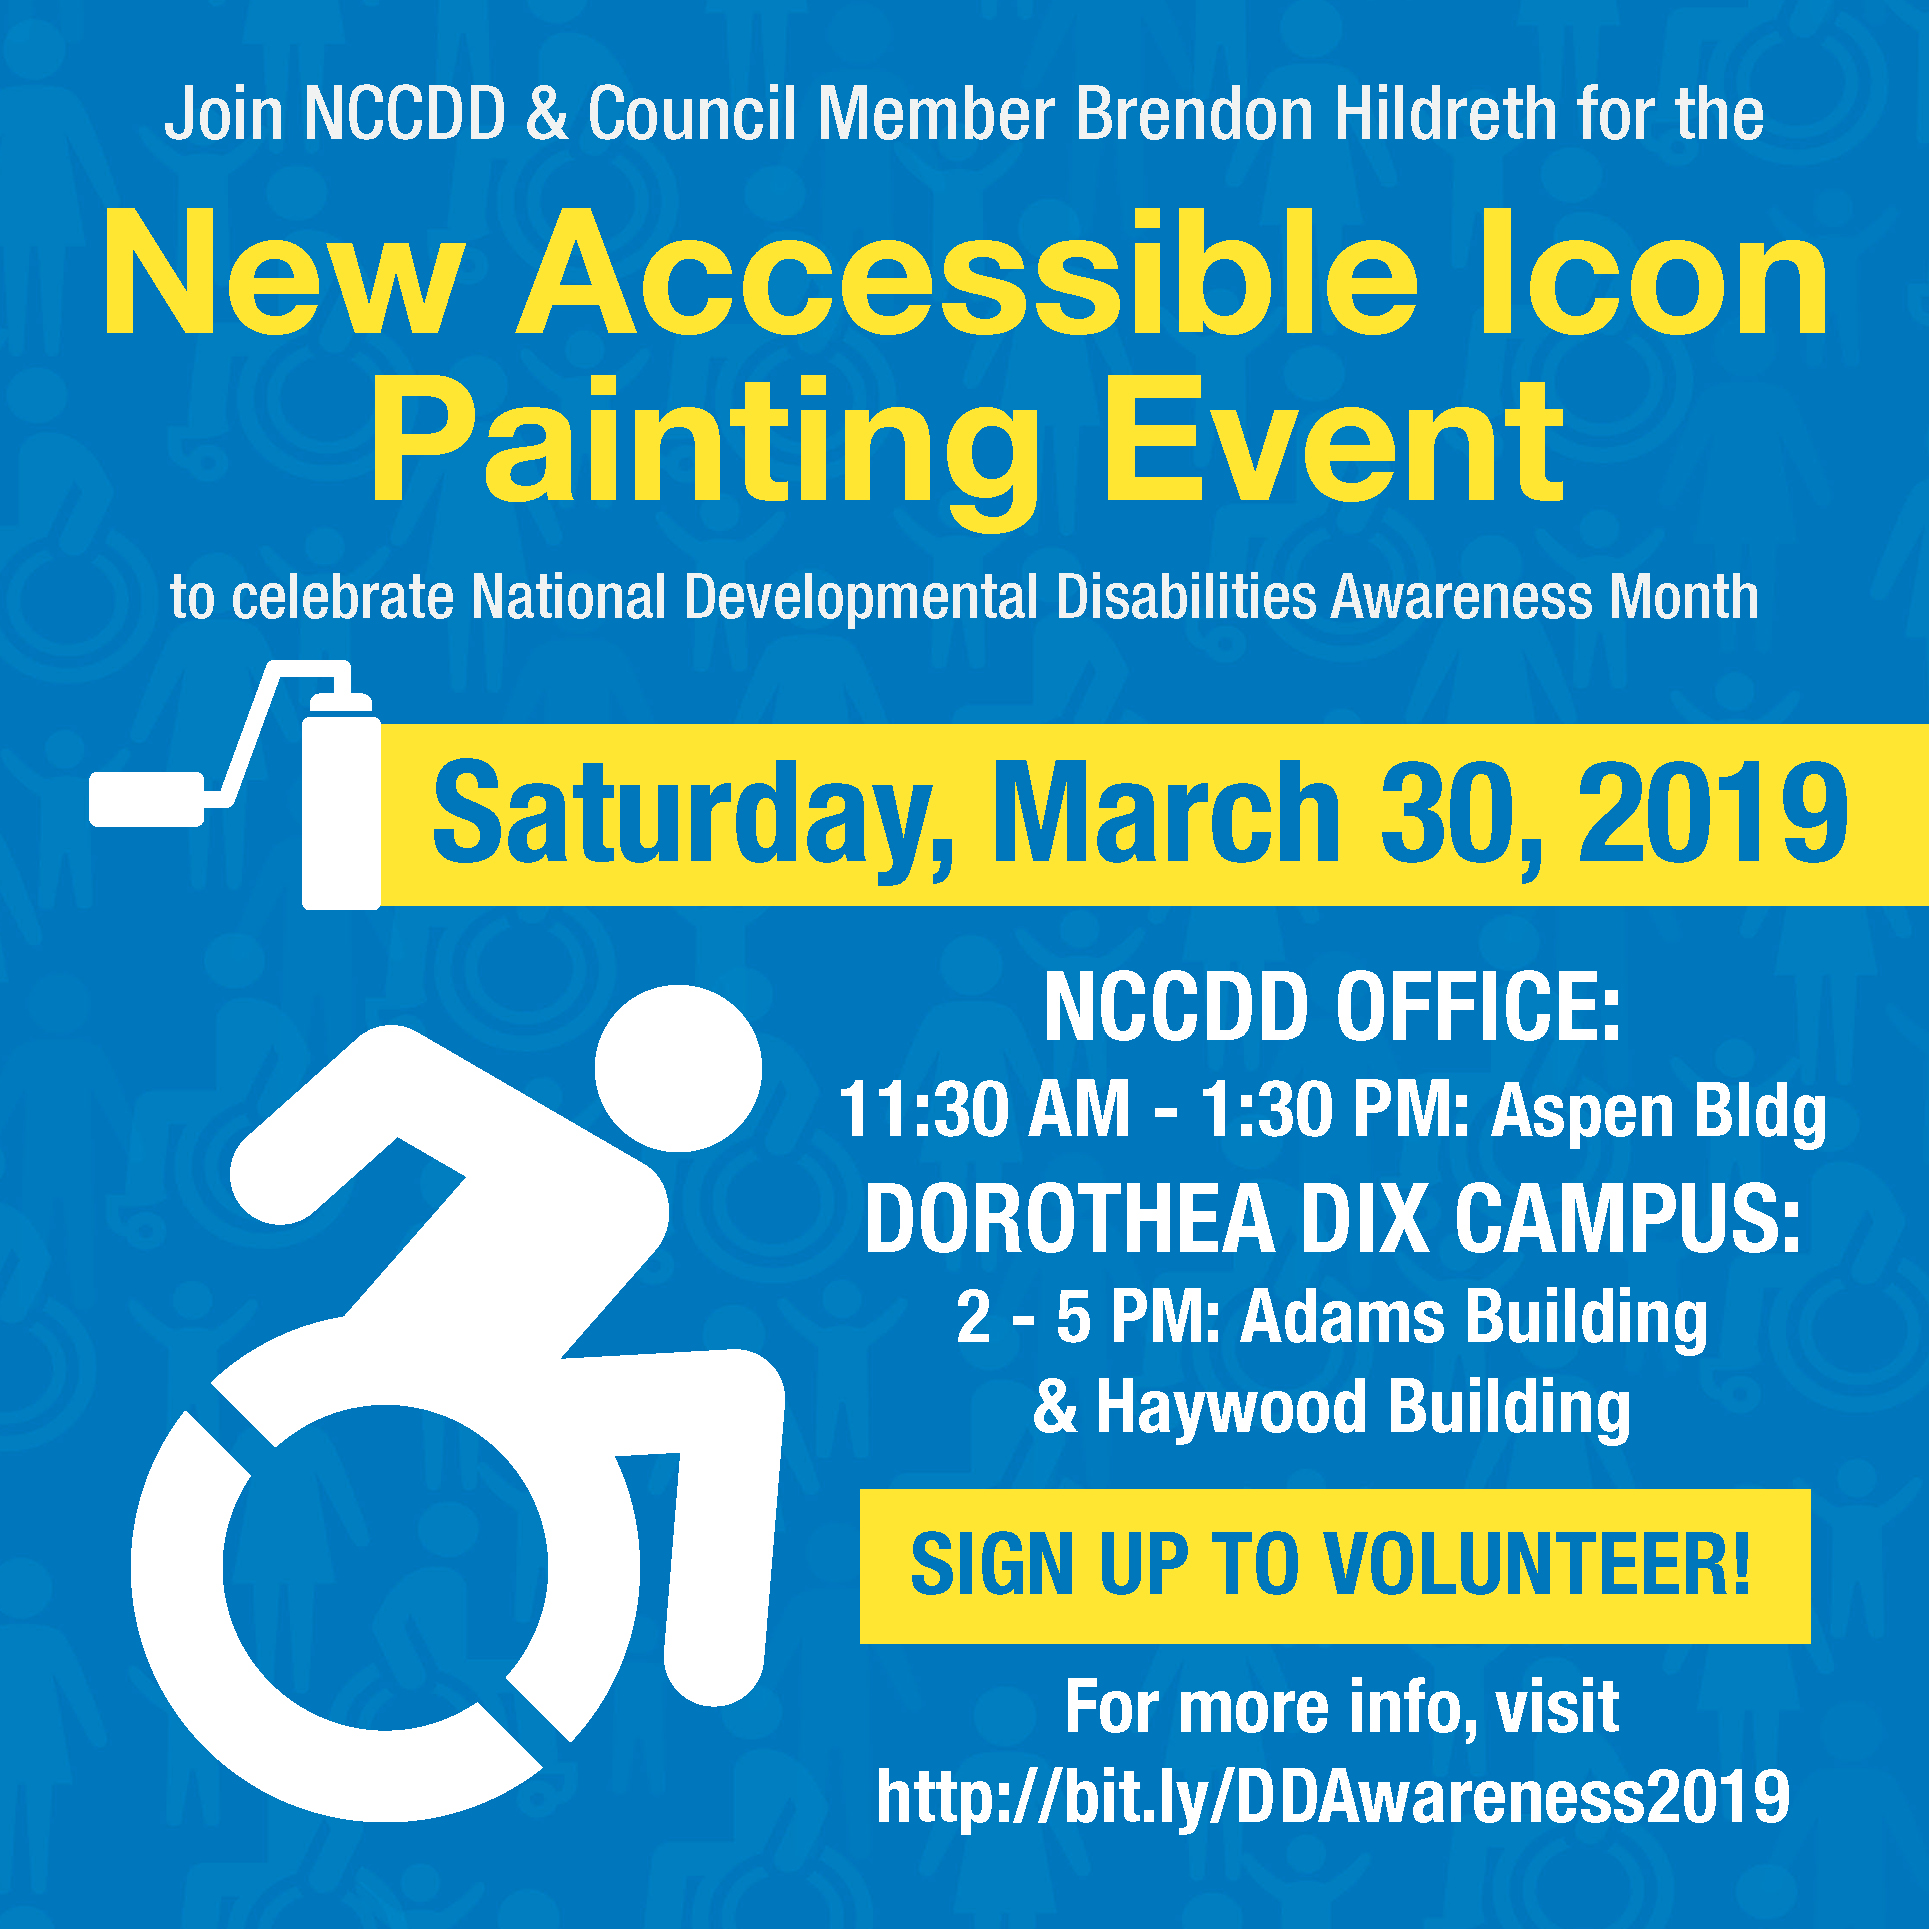 NCCDD Accessible Icon Painting Event